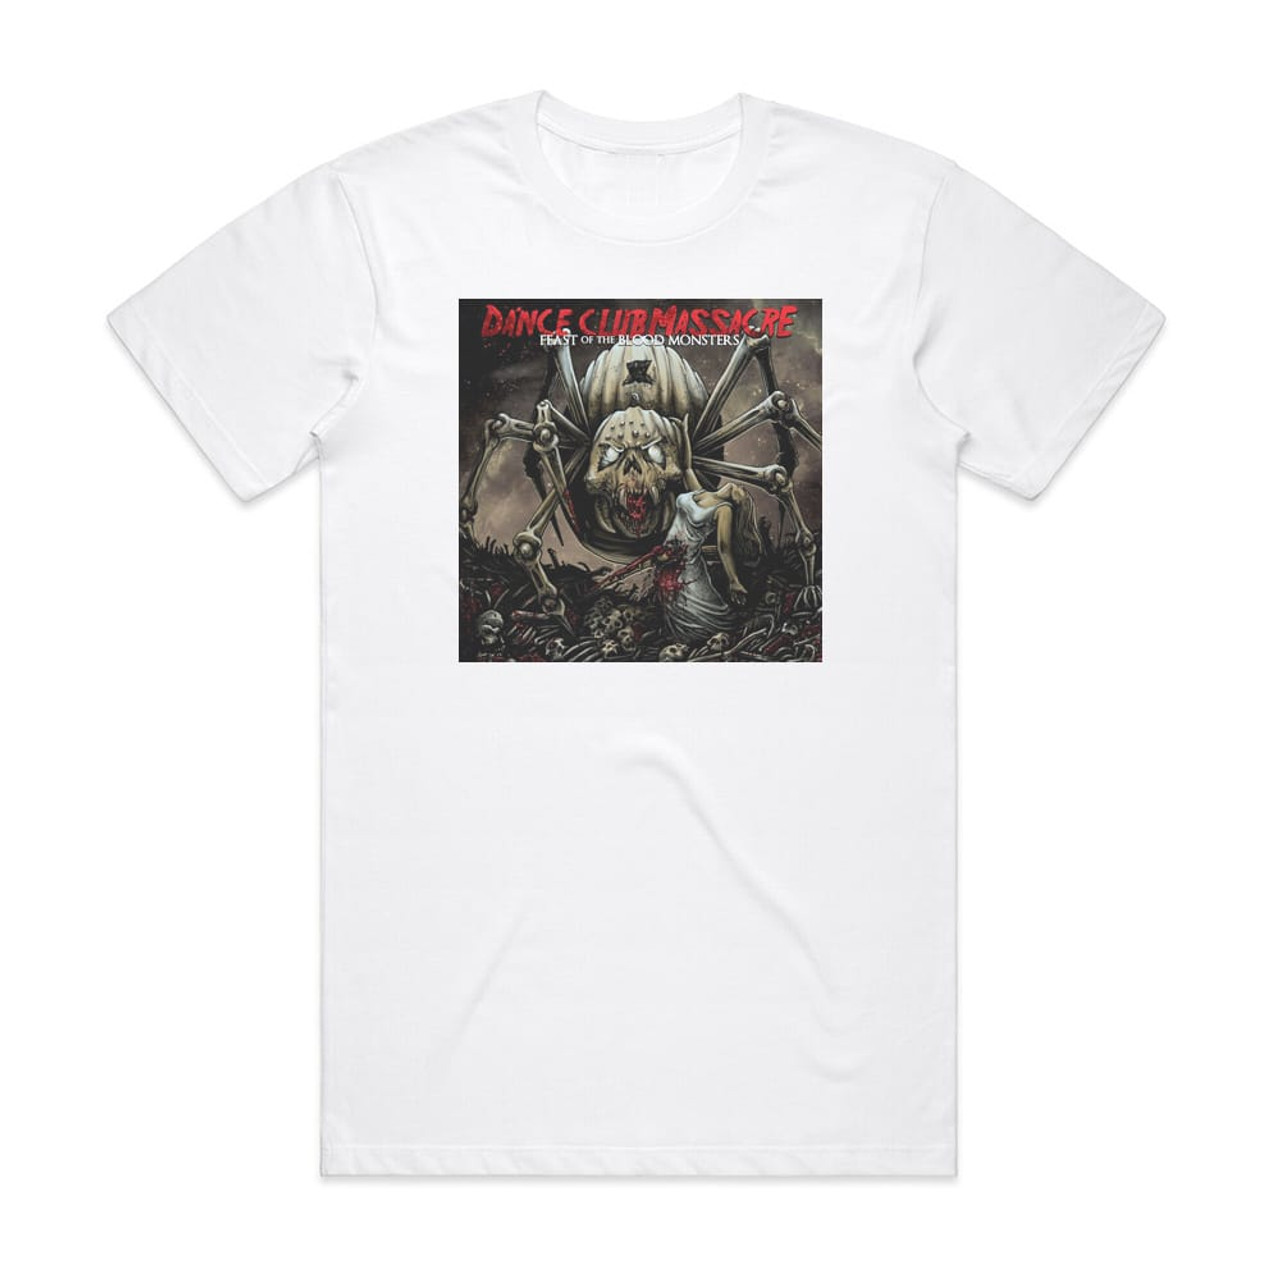 Dance Club Massacre Feast Of The Blood Monsters Album Cover T-Shirt White